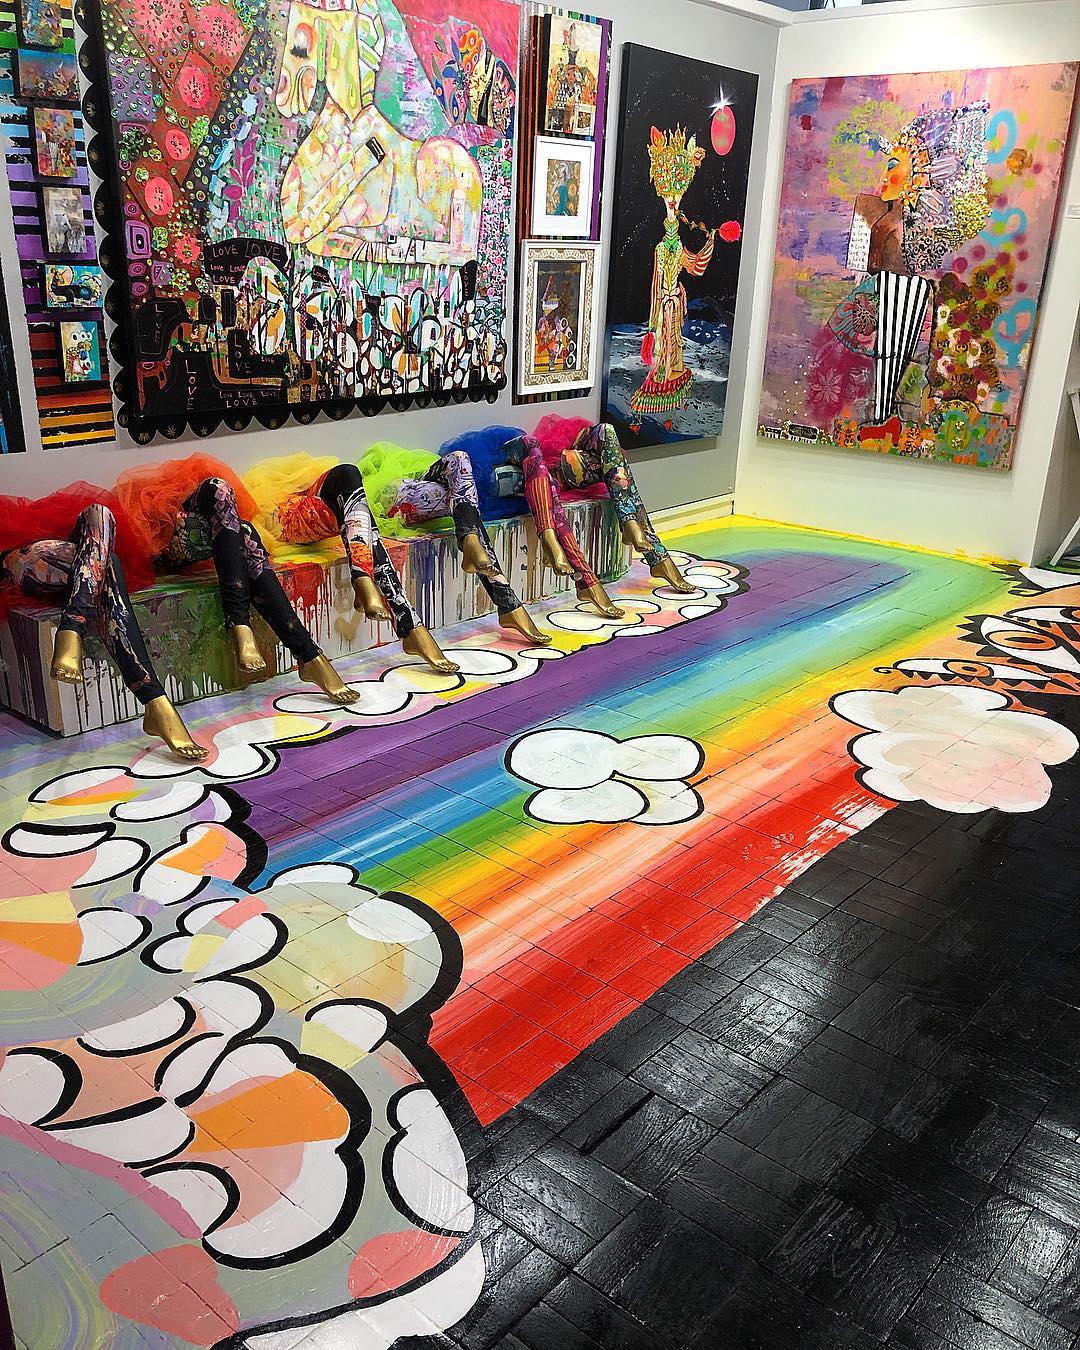 Room in an art museum with bright art on the wall and rainbows on the floor. Photo by Instagram user @omiexperience